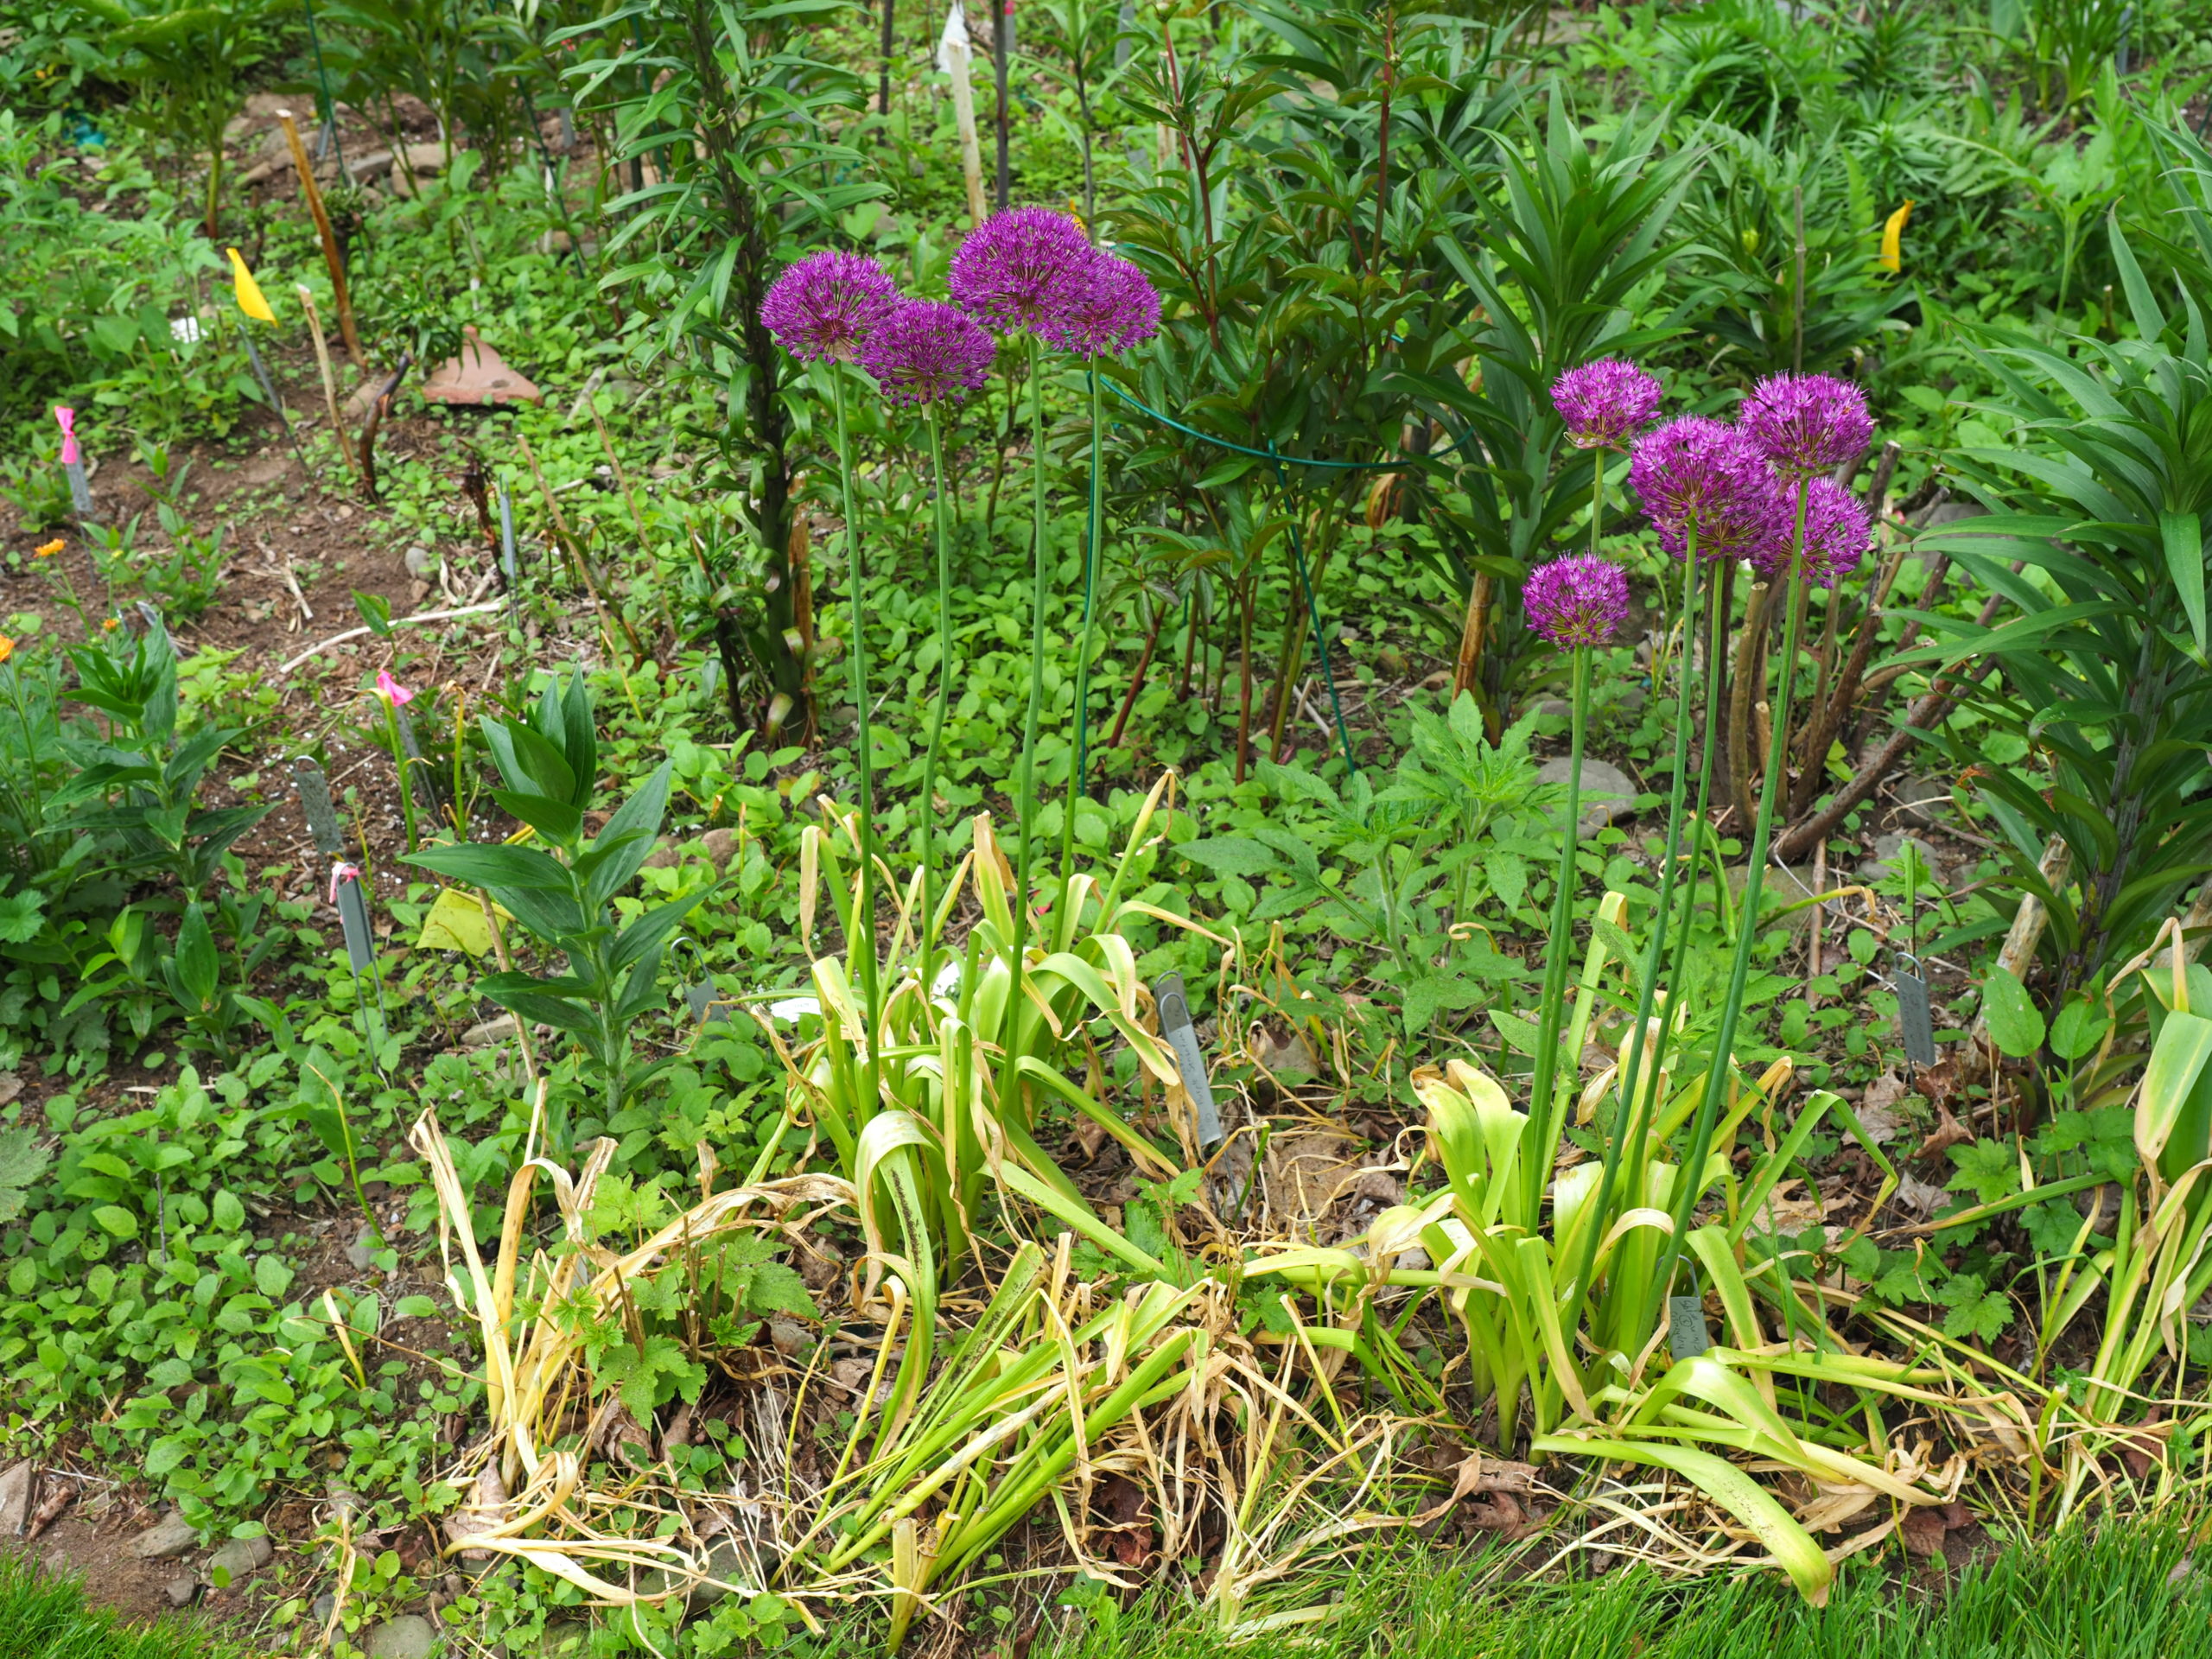 Spring alliums, like this Purple Sensation, have foliage that browns soon after flowering. Don’t cut or tie the foliage until it has turned totally brown and crispy or you’ll have smaller flowers next year since you’re removing the bulbs' 